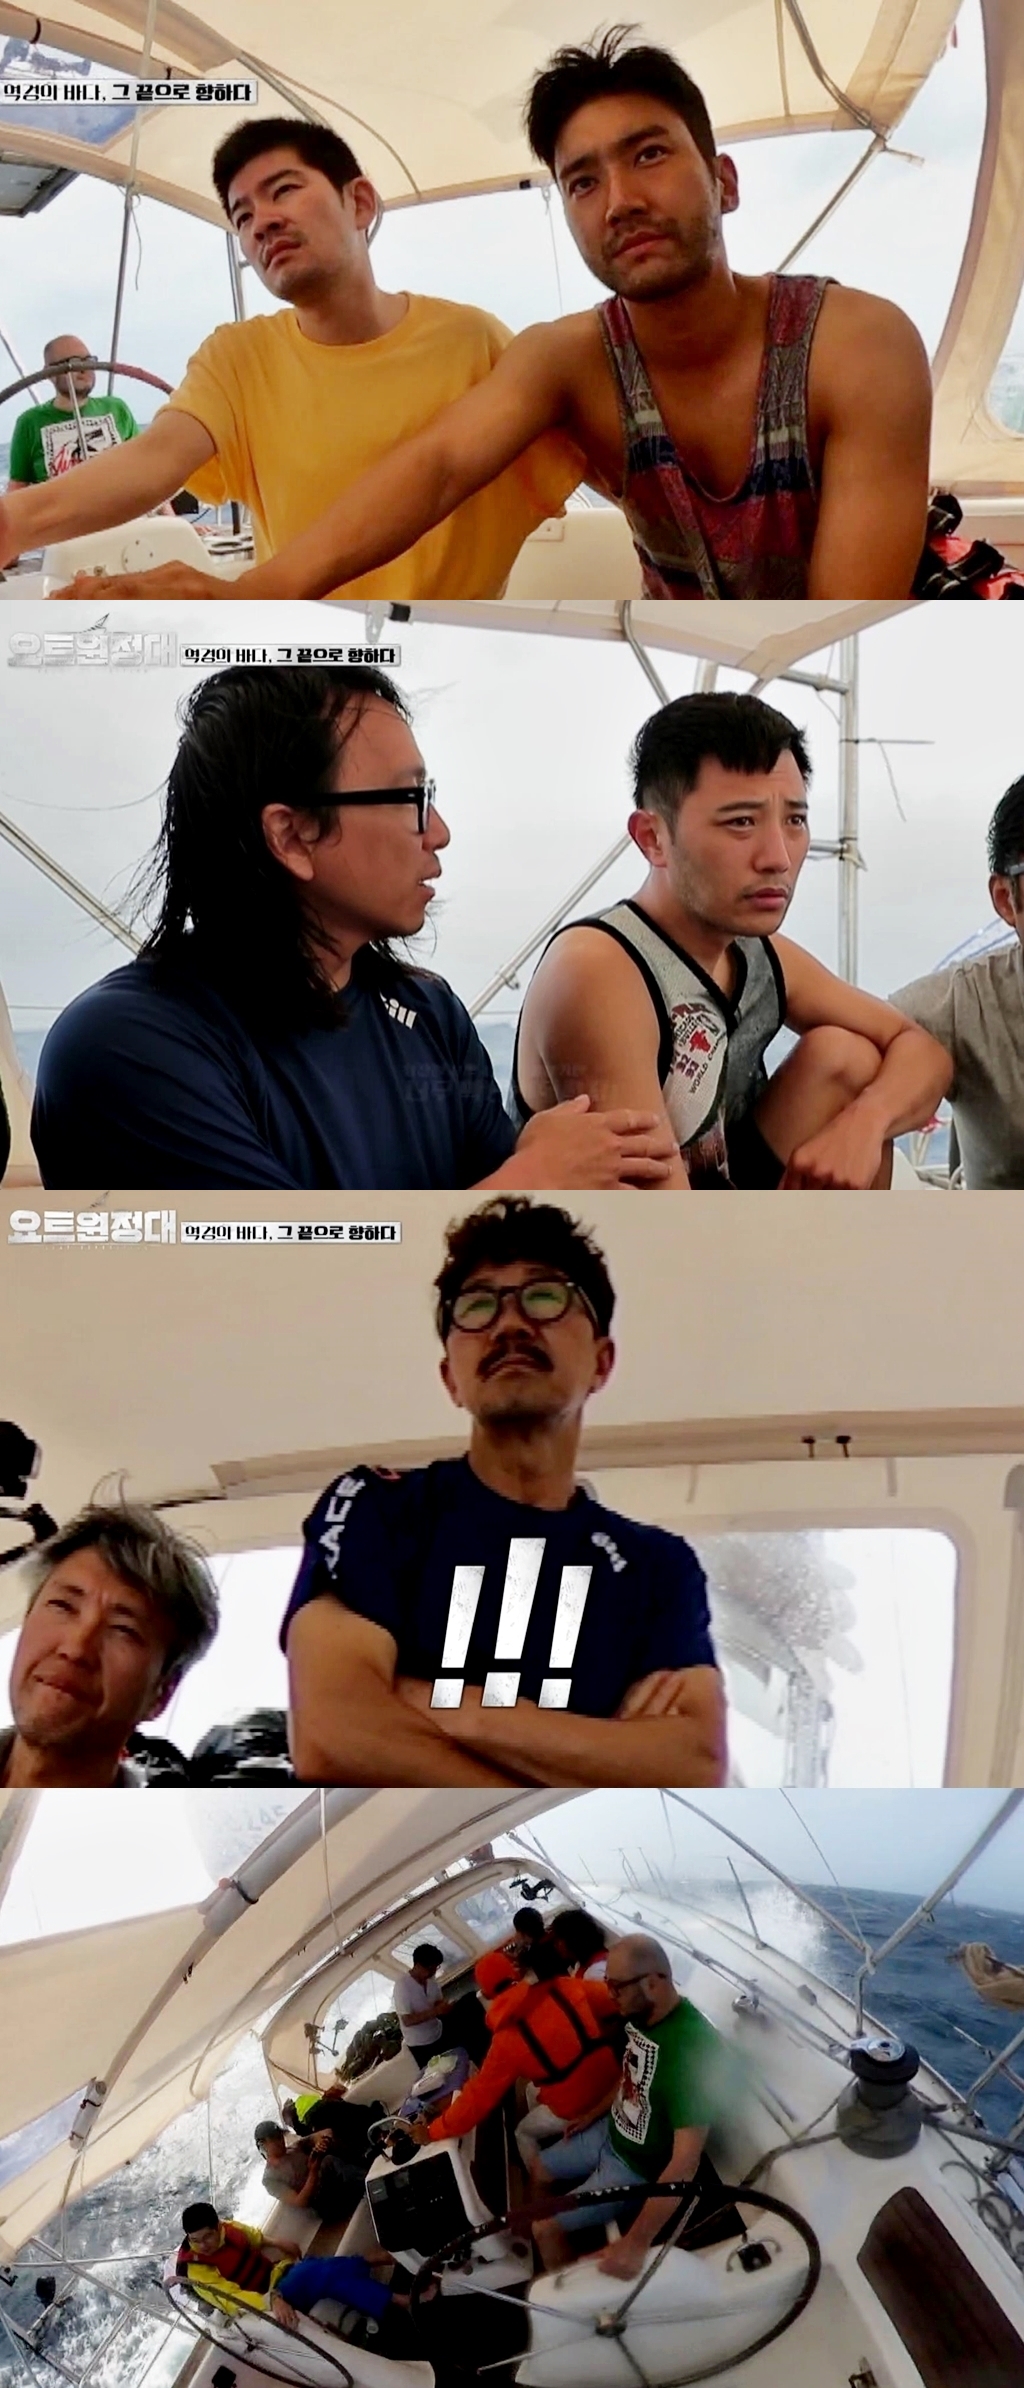 Yot Expedition Jin Goo - Choi Siwon - Chang Kiha - Song Ho-joon is hit by the worst Danger ever since the voyage.In the 6th episode of MBC Everlons Yacht Expedition, which will be broadcast on September 21, it shows Jin Goo - Choi Siwon - Chang Kiha - Song Ho-joon, who is driven by the extremes of the storm.The Pacific Ocean survival period of the Yot Expedition members who feel the power of Mother Nature through their bodies will be unfolded realistically.The yacht expedition members, who were on the 6th day of the voyage, were said to have become white due to the power of typhoons on the sea that they encountered for the first time in their lives.The crew tried to hold on, but they were mentally and physically exhausted in situations that were not as good as they were.To make matters worse, all of them were in an inability to communicate with the support line.At this time, Captain Kim Seung-jin made an emergency proposal to the crew as if he had decided something.However, no one could answer it, and Chang Kiha had come to ask the production team to stop shooting.The appearance of the first conflict with the unusual person who hovers around the yacht makes the tension soar with the previous class Danger.It was a yacht expedition that continued the Pacific Ocean voyage with the aim of the South Cross.In the meantime, Storm, who met in the past, said that he drove the sailing of the yacht expedition to the worst situation that he could not see ahead.And for the first time, he was even confused, and Danger in the yacht was silent.In an uncontrollable situation, Jin Goo, who was always passionate, and his delightful eldest brother Song Ho-joon showed tears, amplifying their curiosity about what happened to them.What will the decision be made on the yacht expedition in the mess? It can be seen at the 6th MBC Everlon Yacht Expedition, which will be broadcast at 8:30 pm on Monday, September 21.iMBC  Photos = MBC Everlon